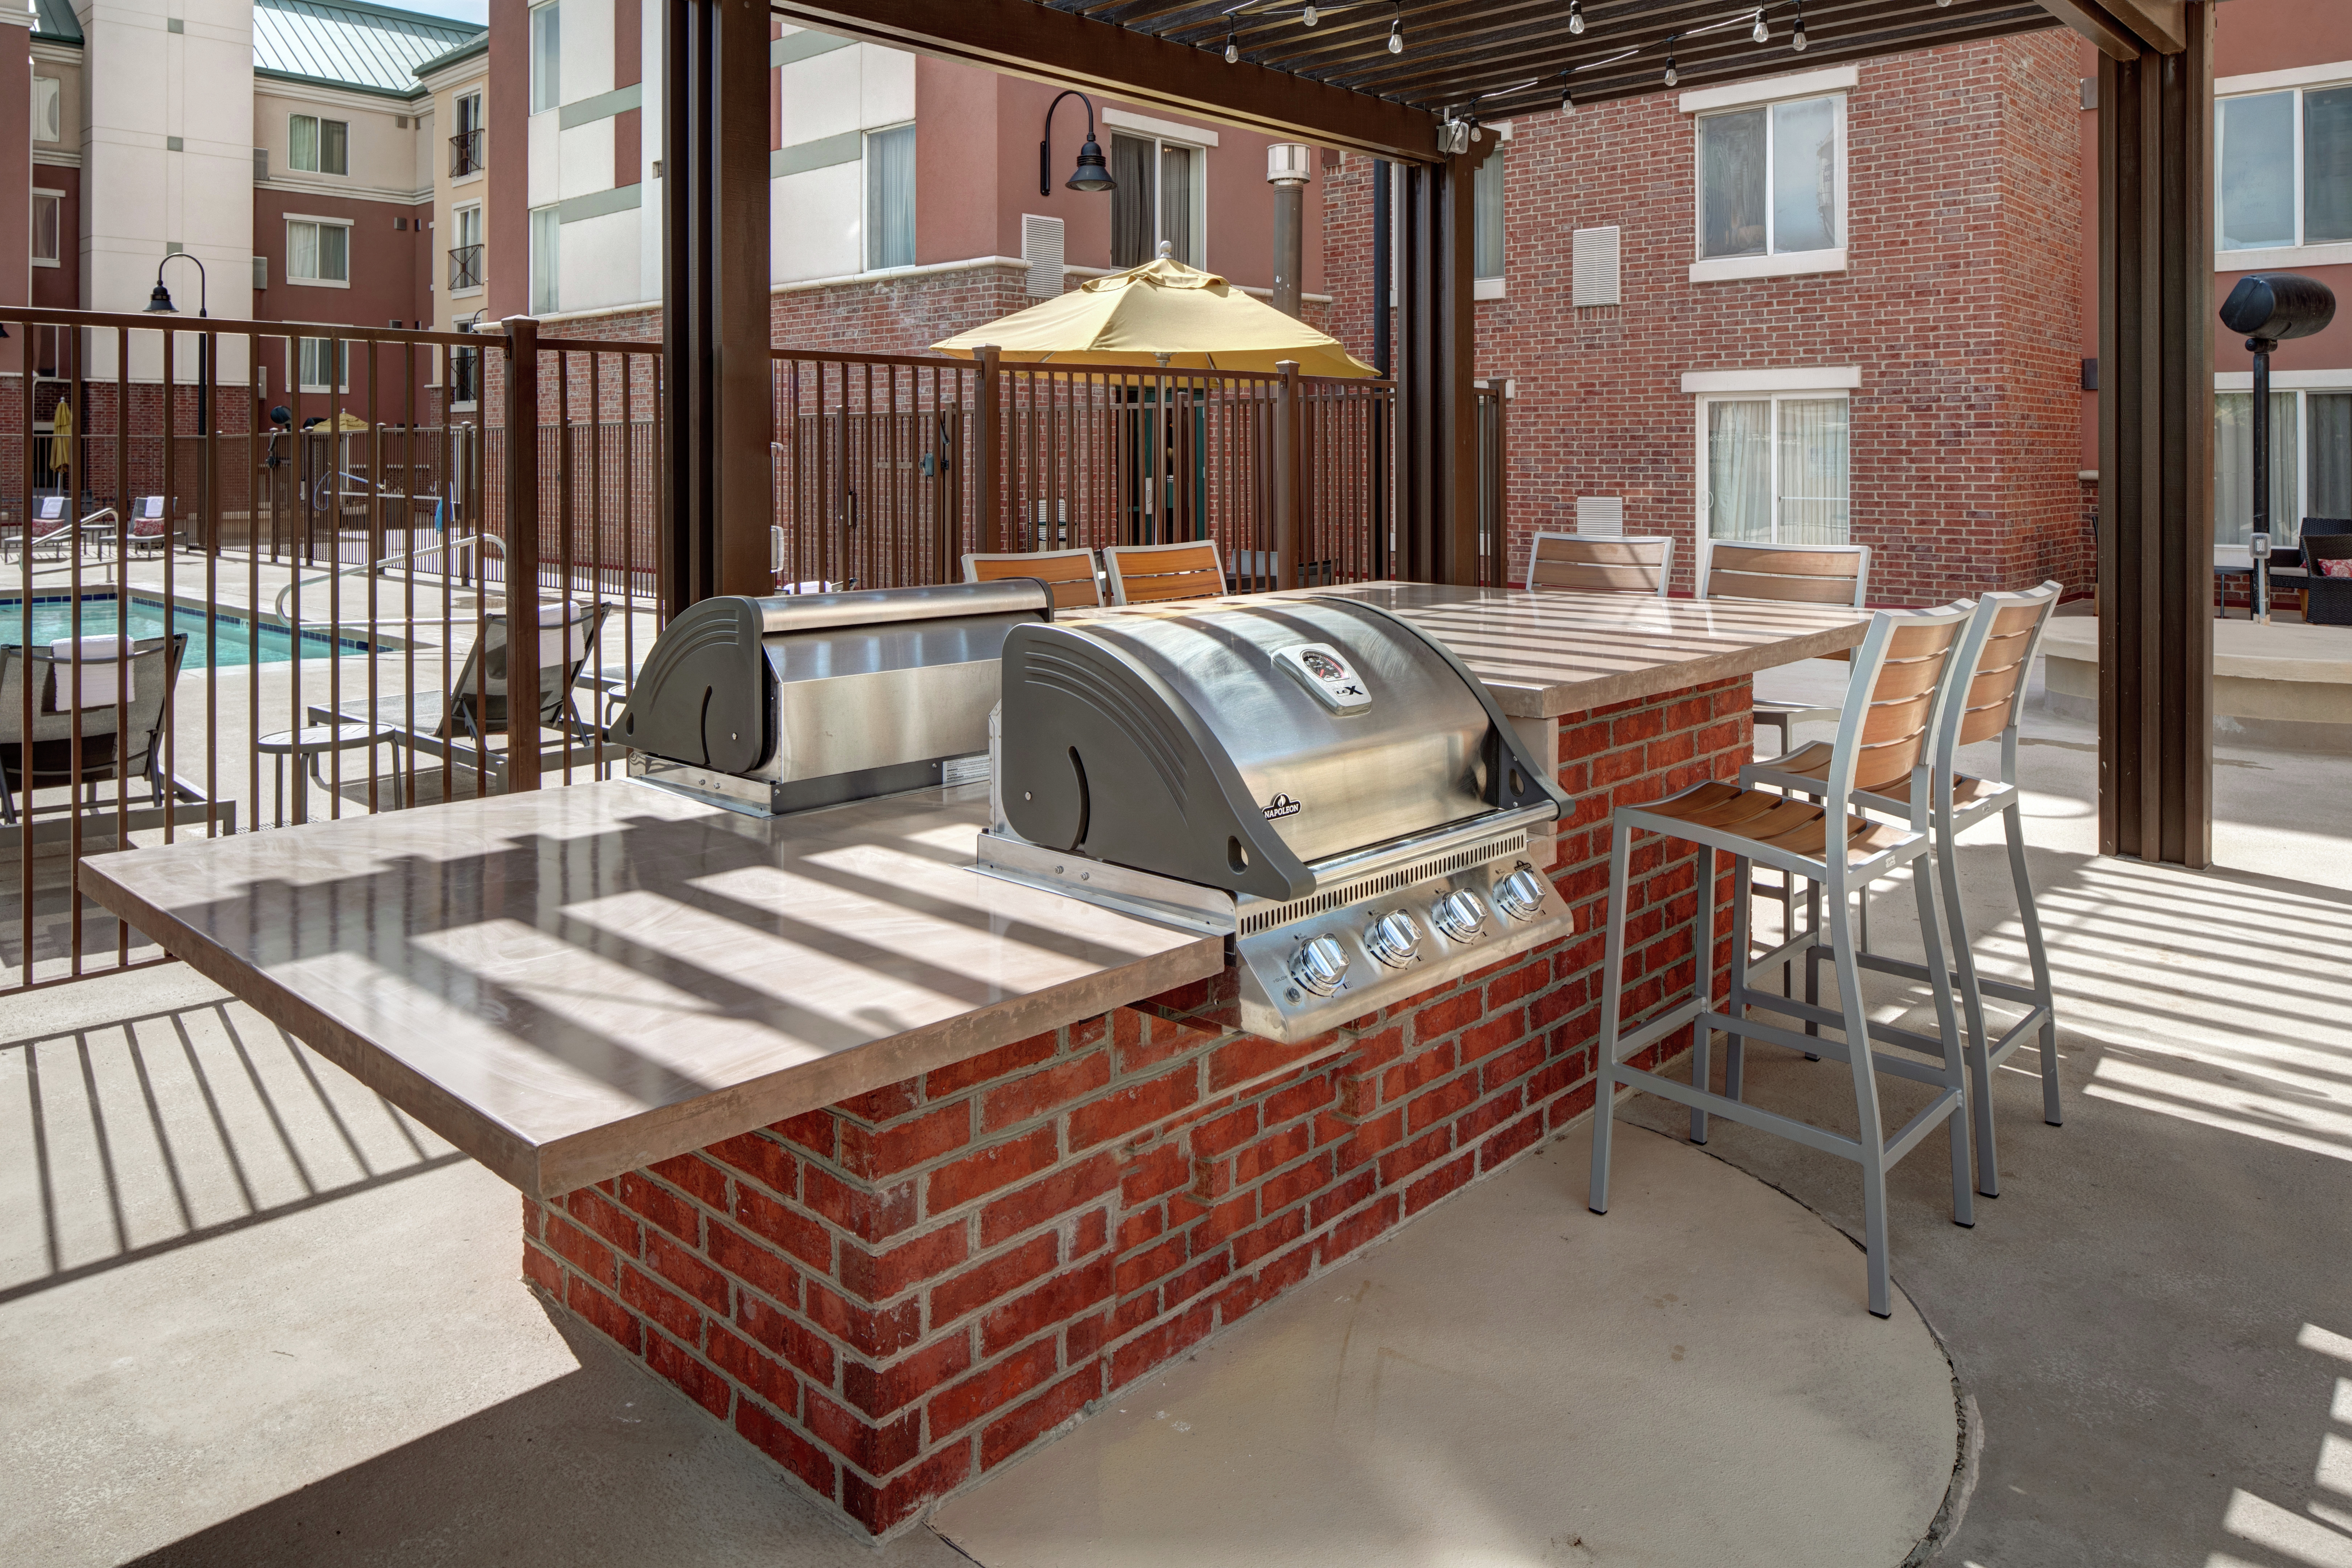 Outdoor Patio Adjacent to the Swimming Pool with BBQ Grill